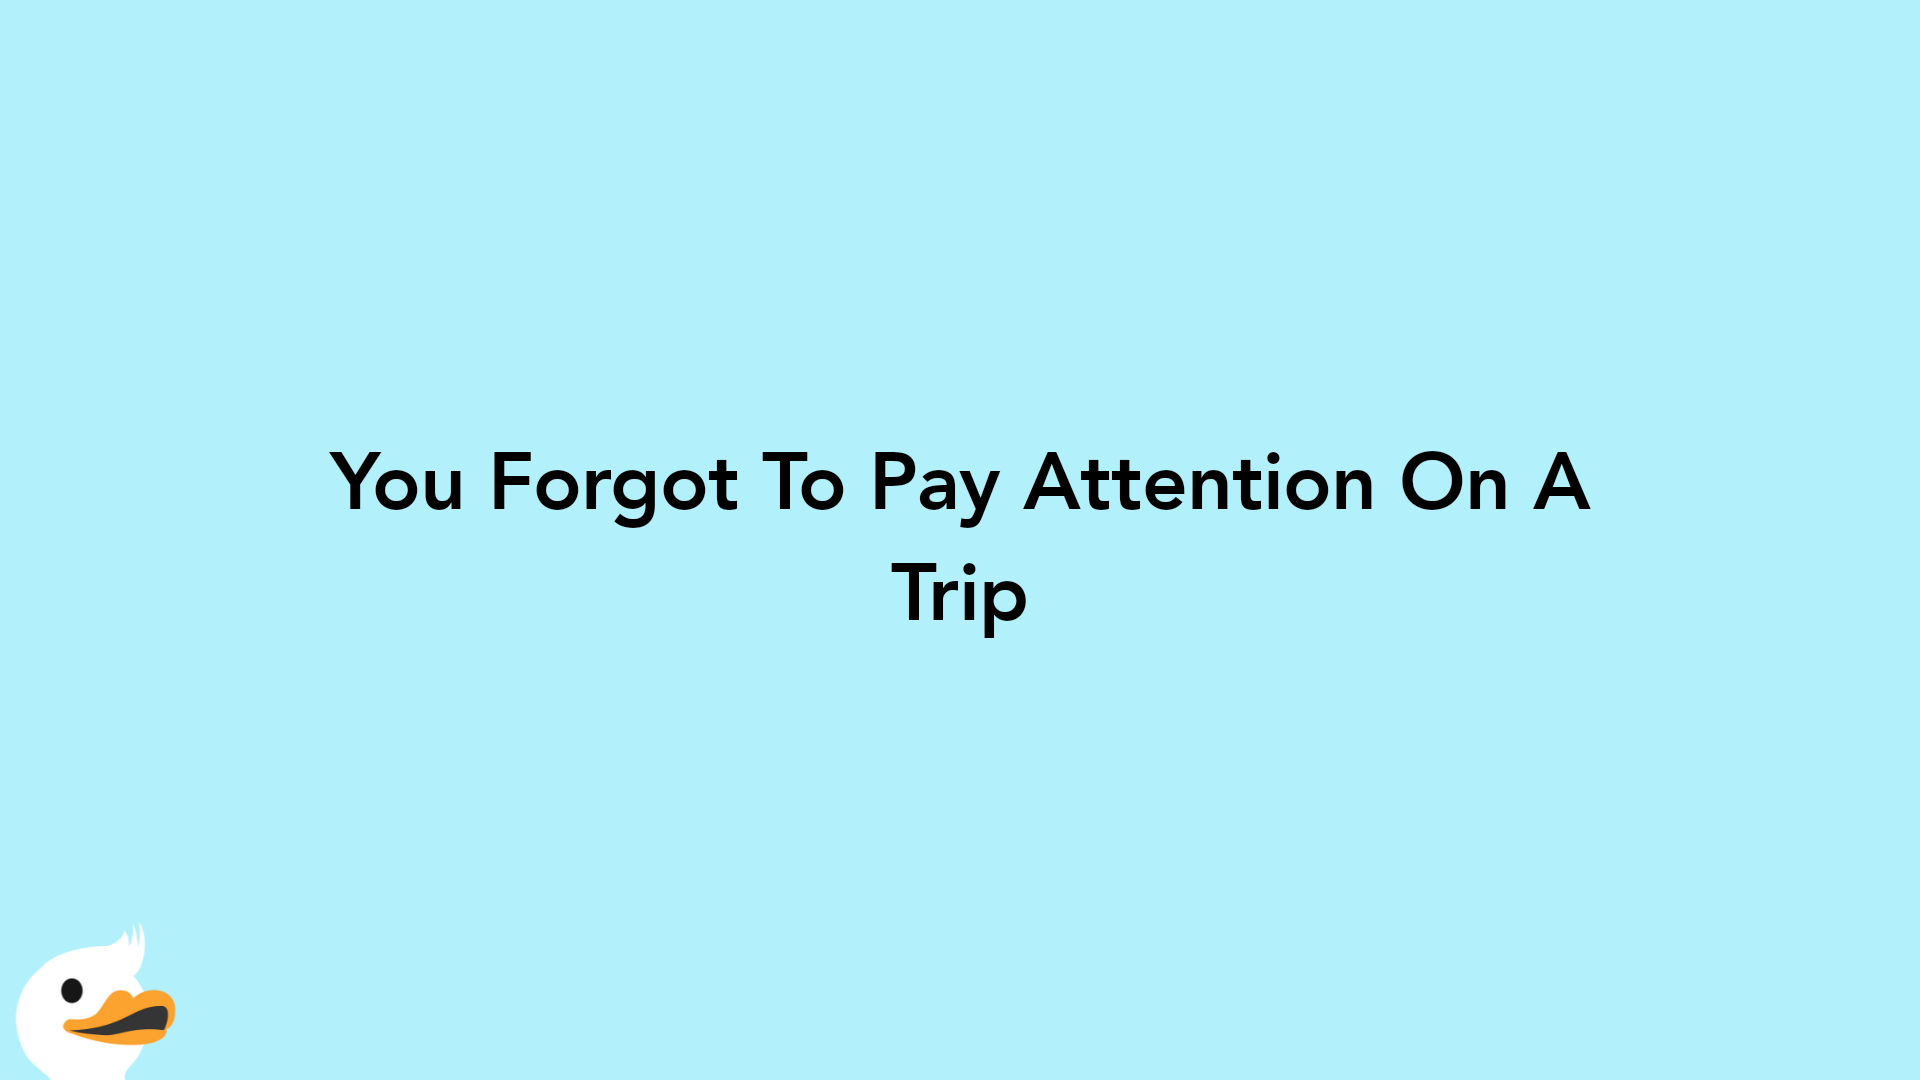 You Forgot To Pay Attention On A Trip